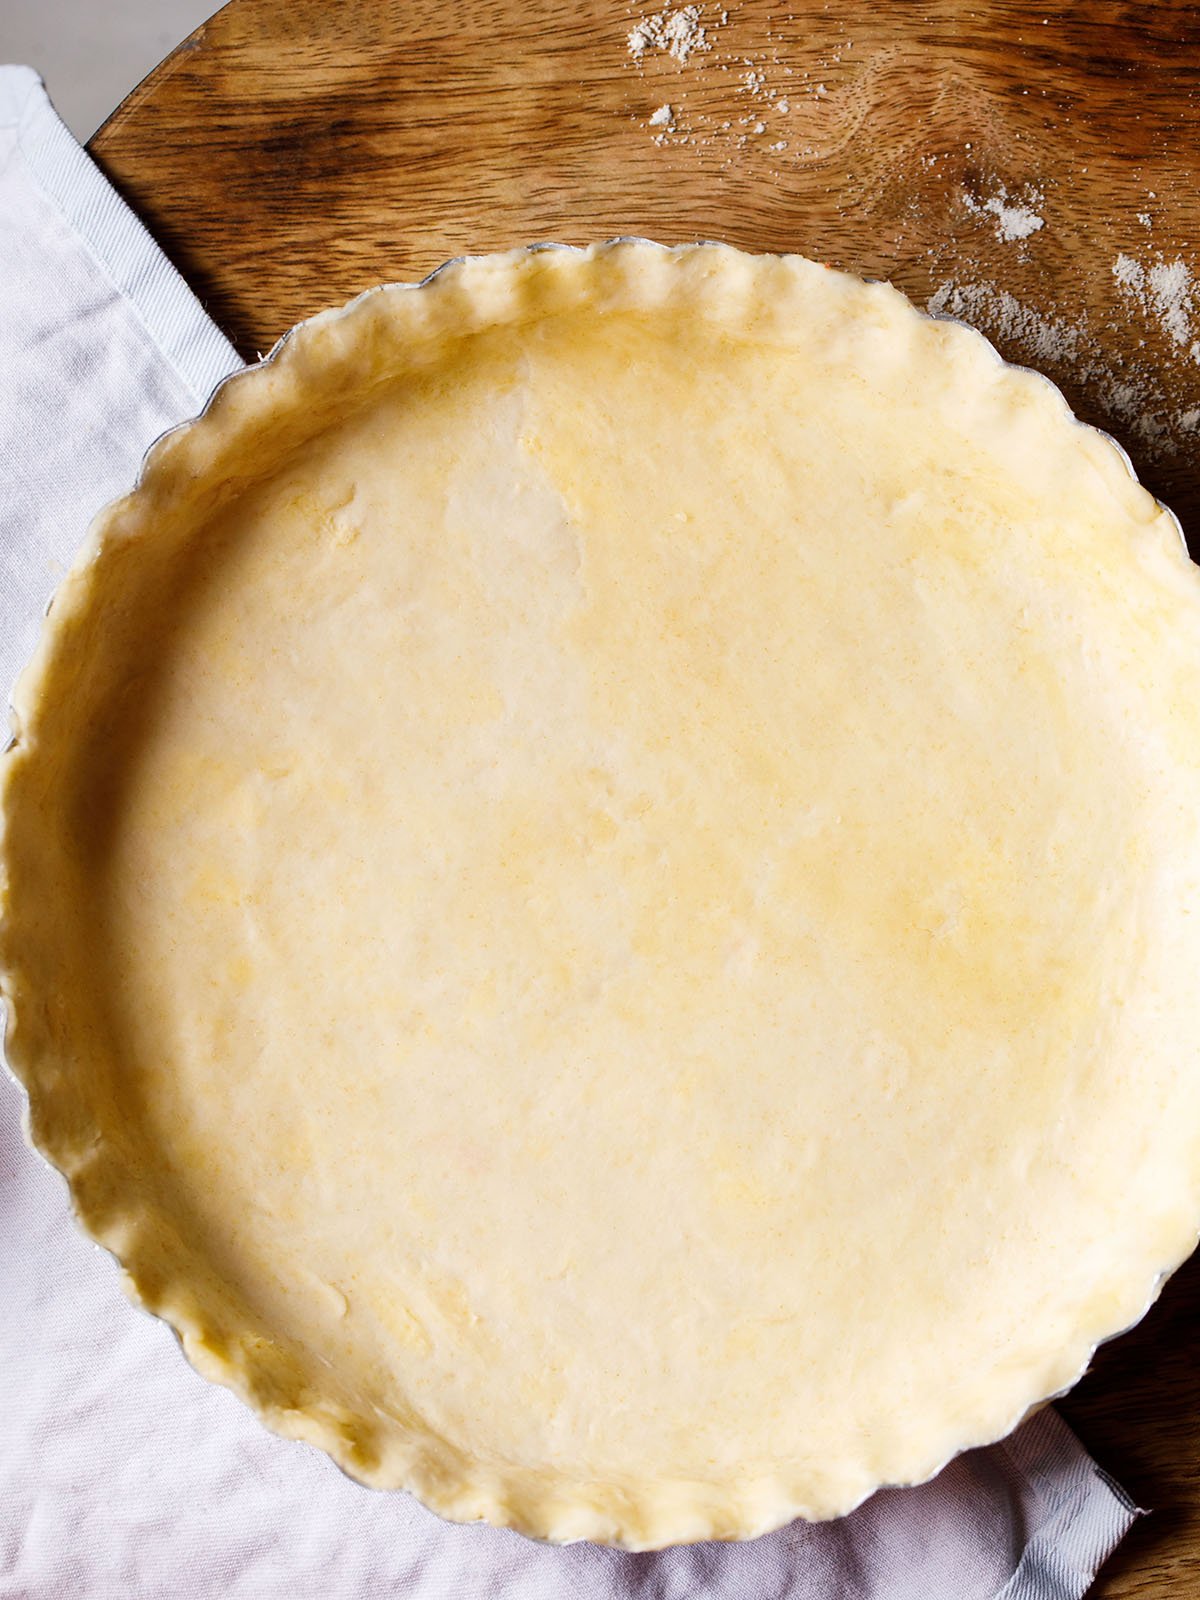 homemade all butter pie dough after rolling out and placing in a pie pan, prior to baking, with scalloped edges